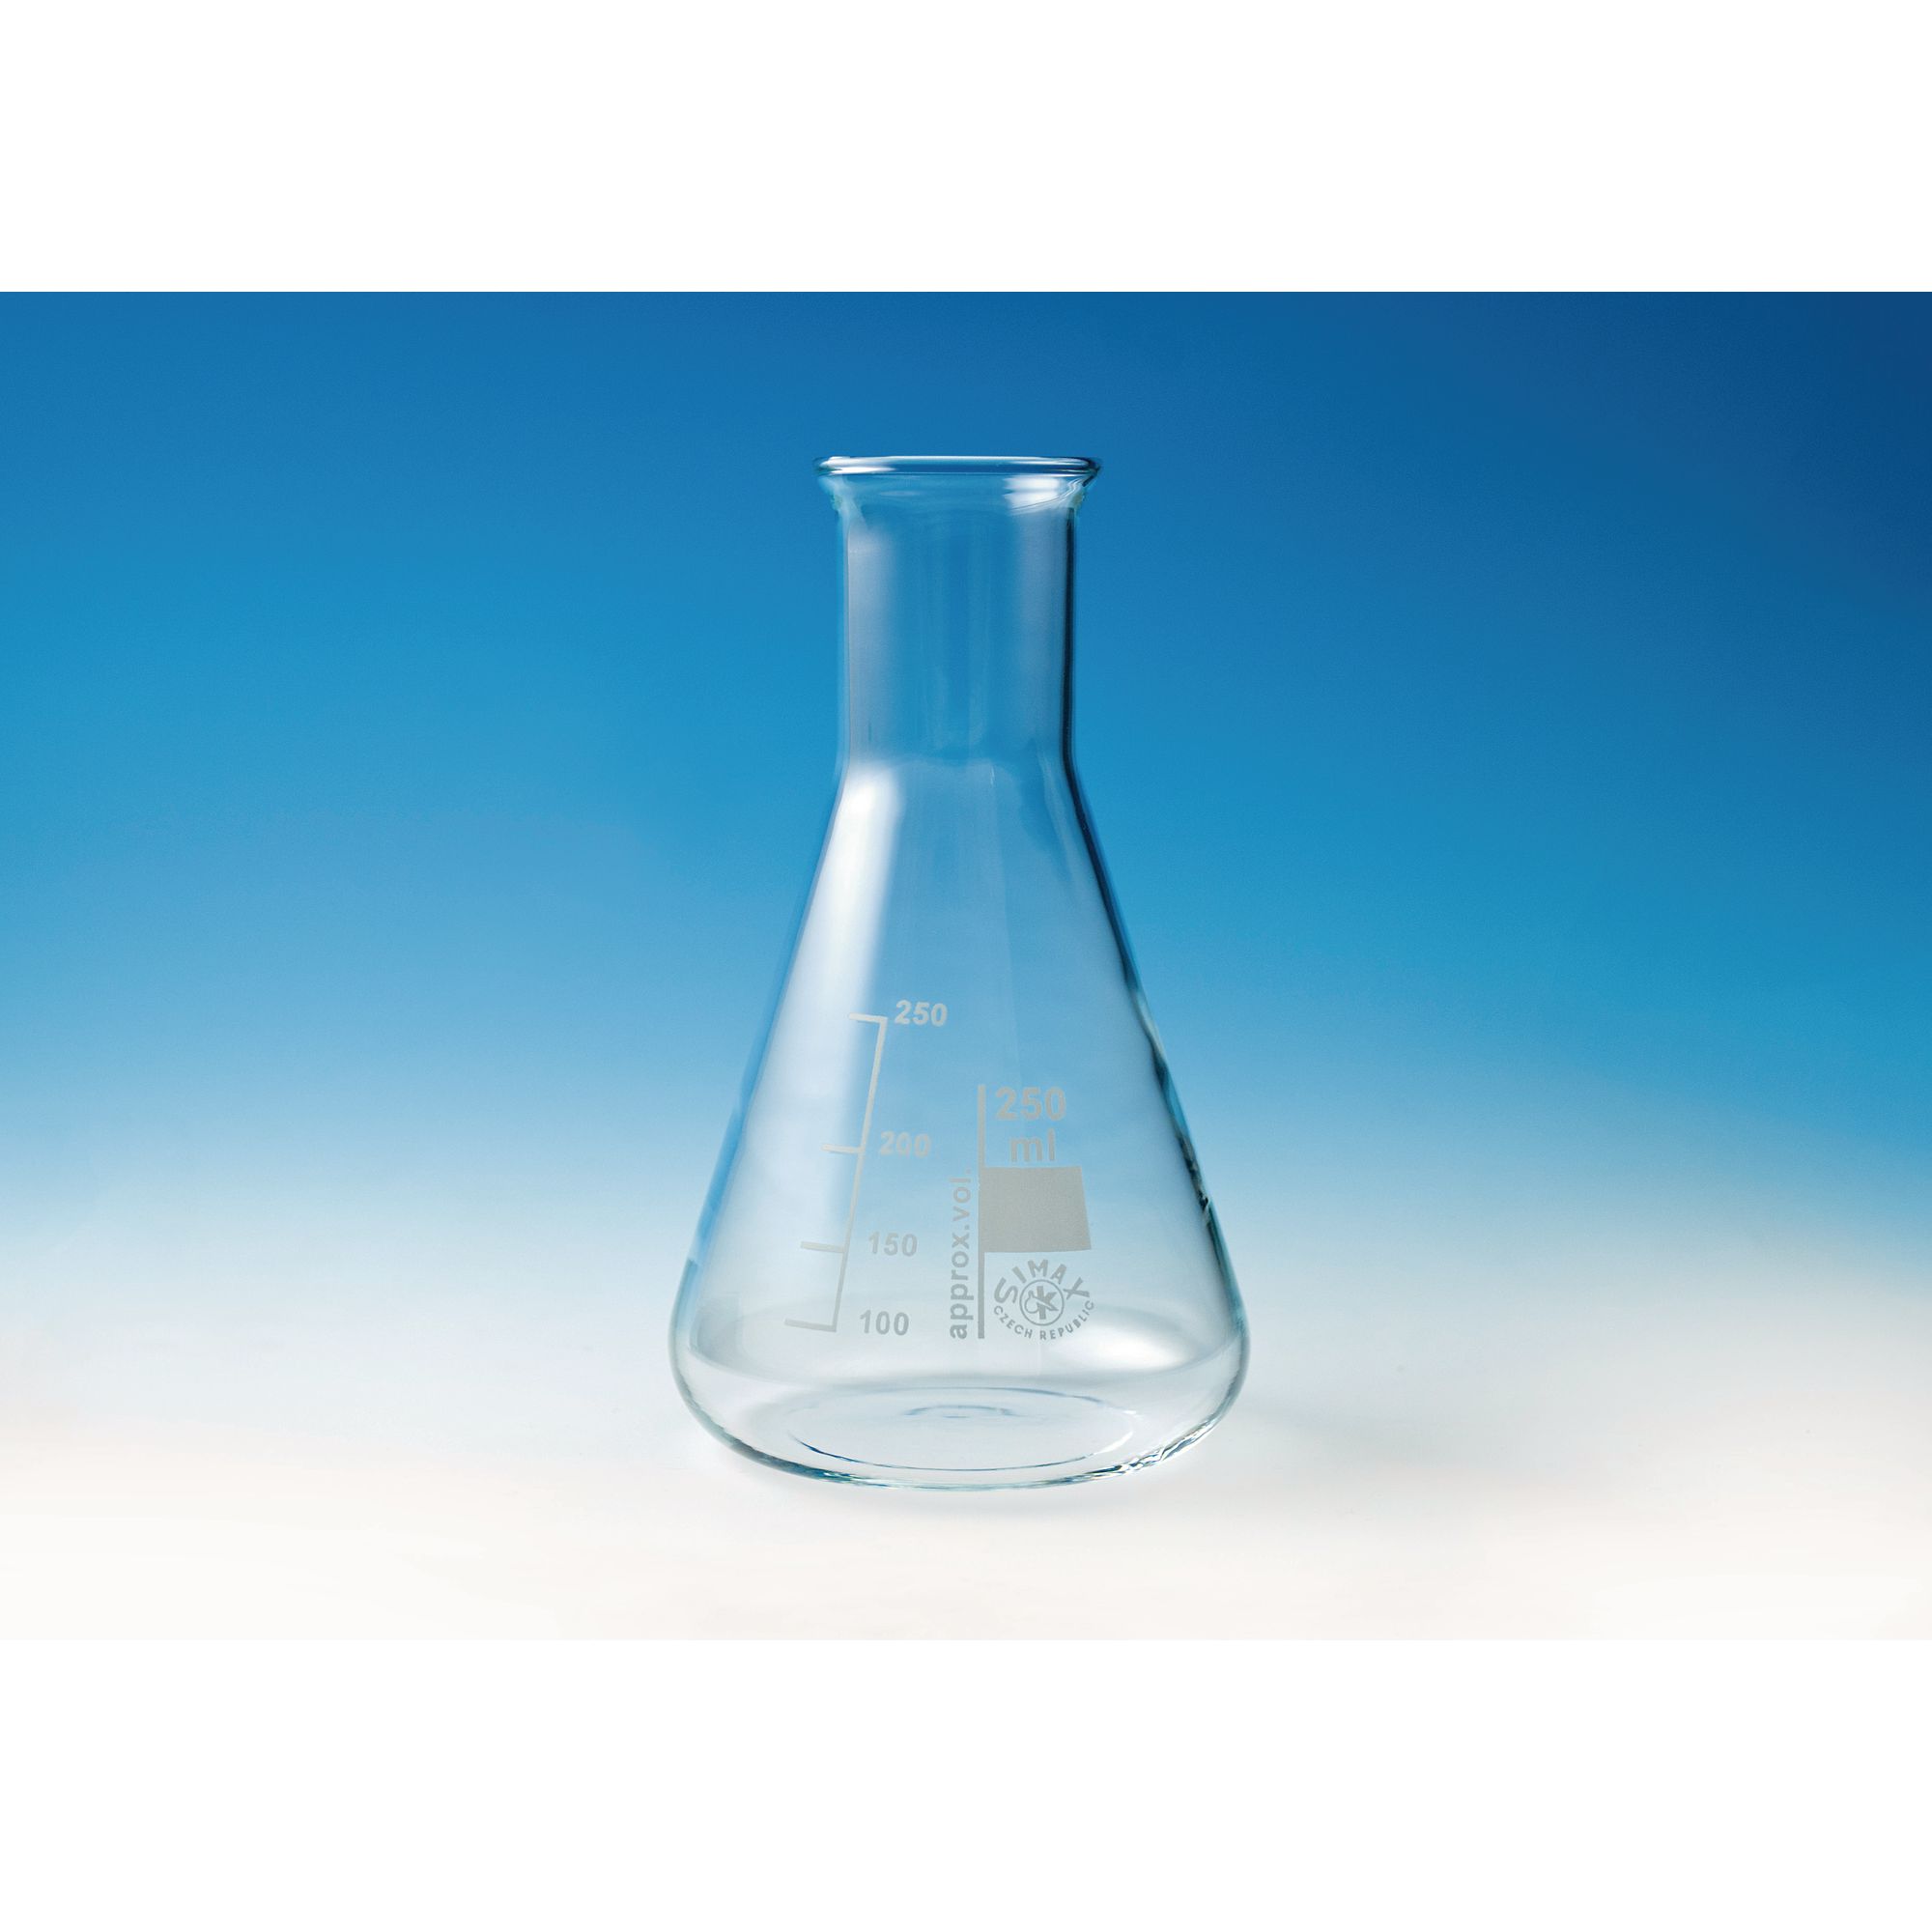 Simax Nmouth Conflask 500mlp10